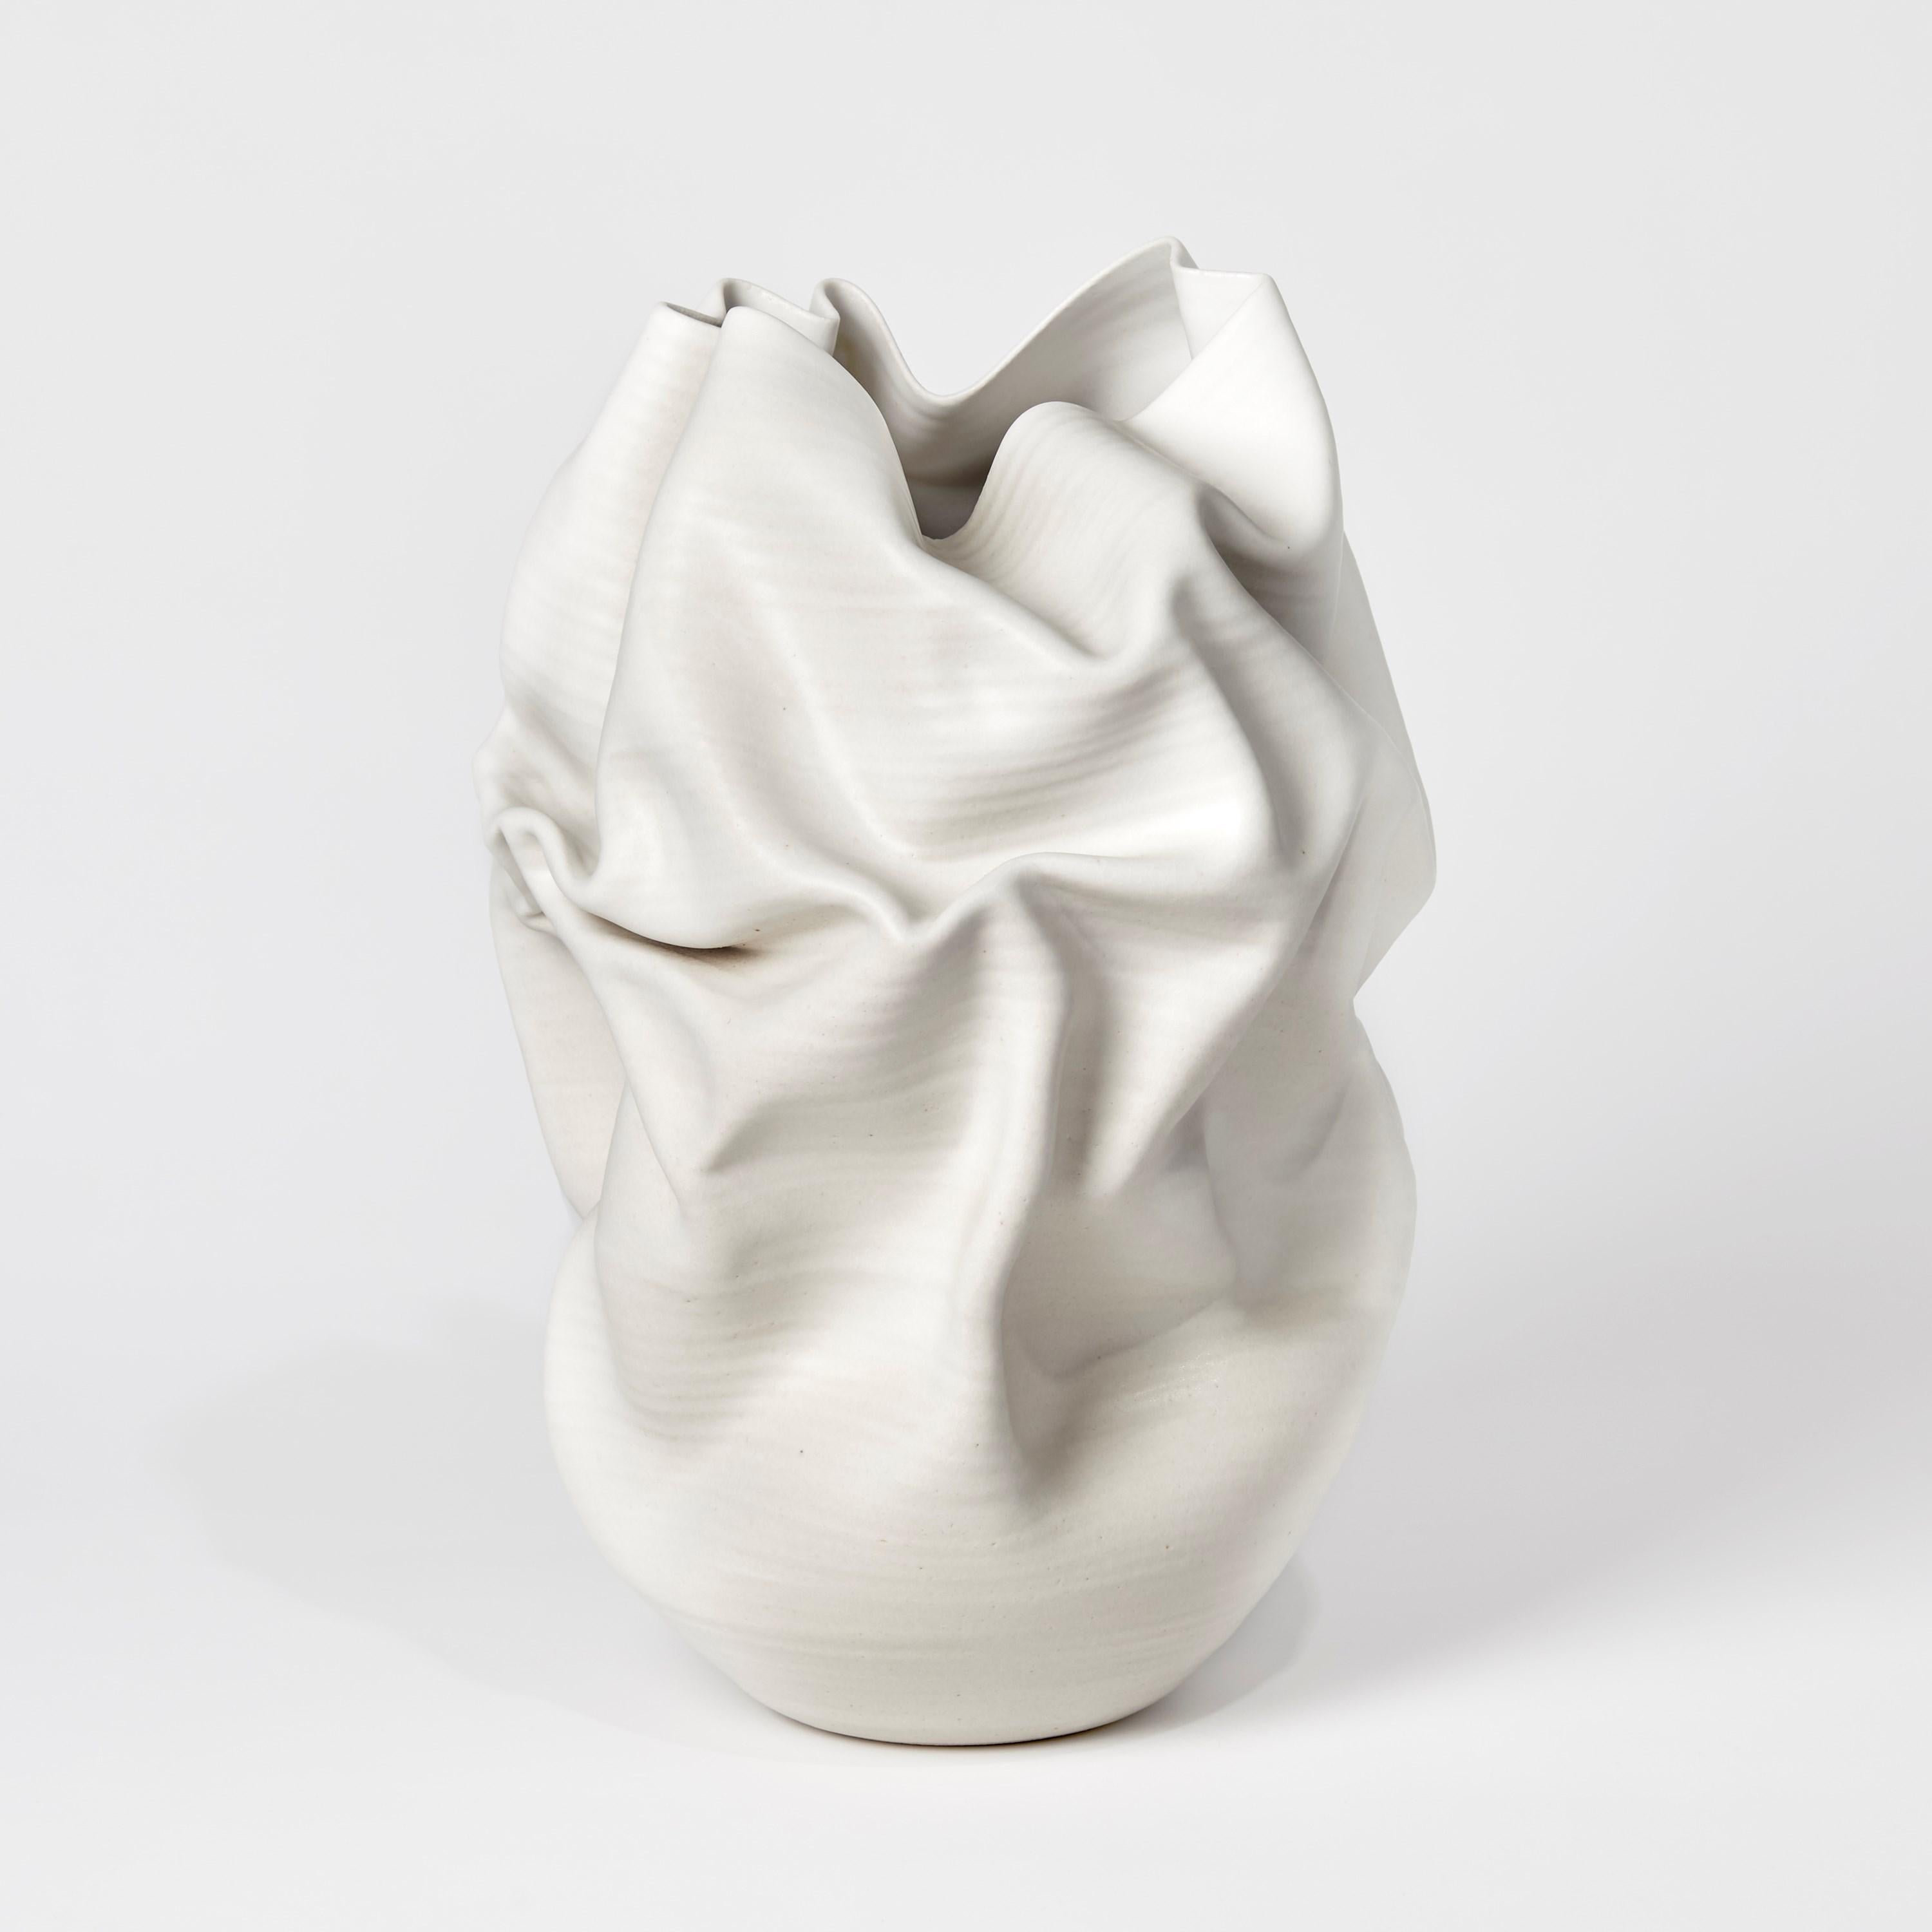 Undulating Crumpled Form No 51 is a unique ceramic sculptural vessel by the British artist Nicholas Arroyave-Portela, made from white St.Thomas clay with stoneware glazes.

Nicholas Arroyave-Portela’s professional ceramic practice began in 1994.